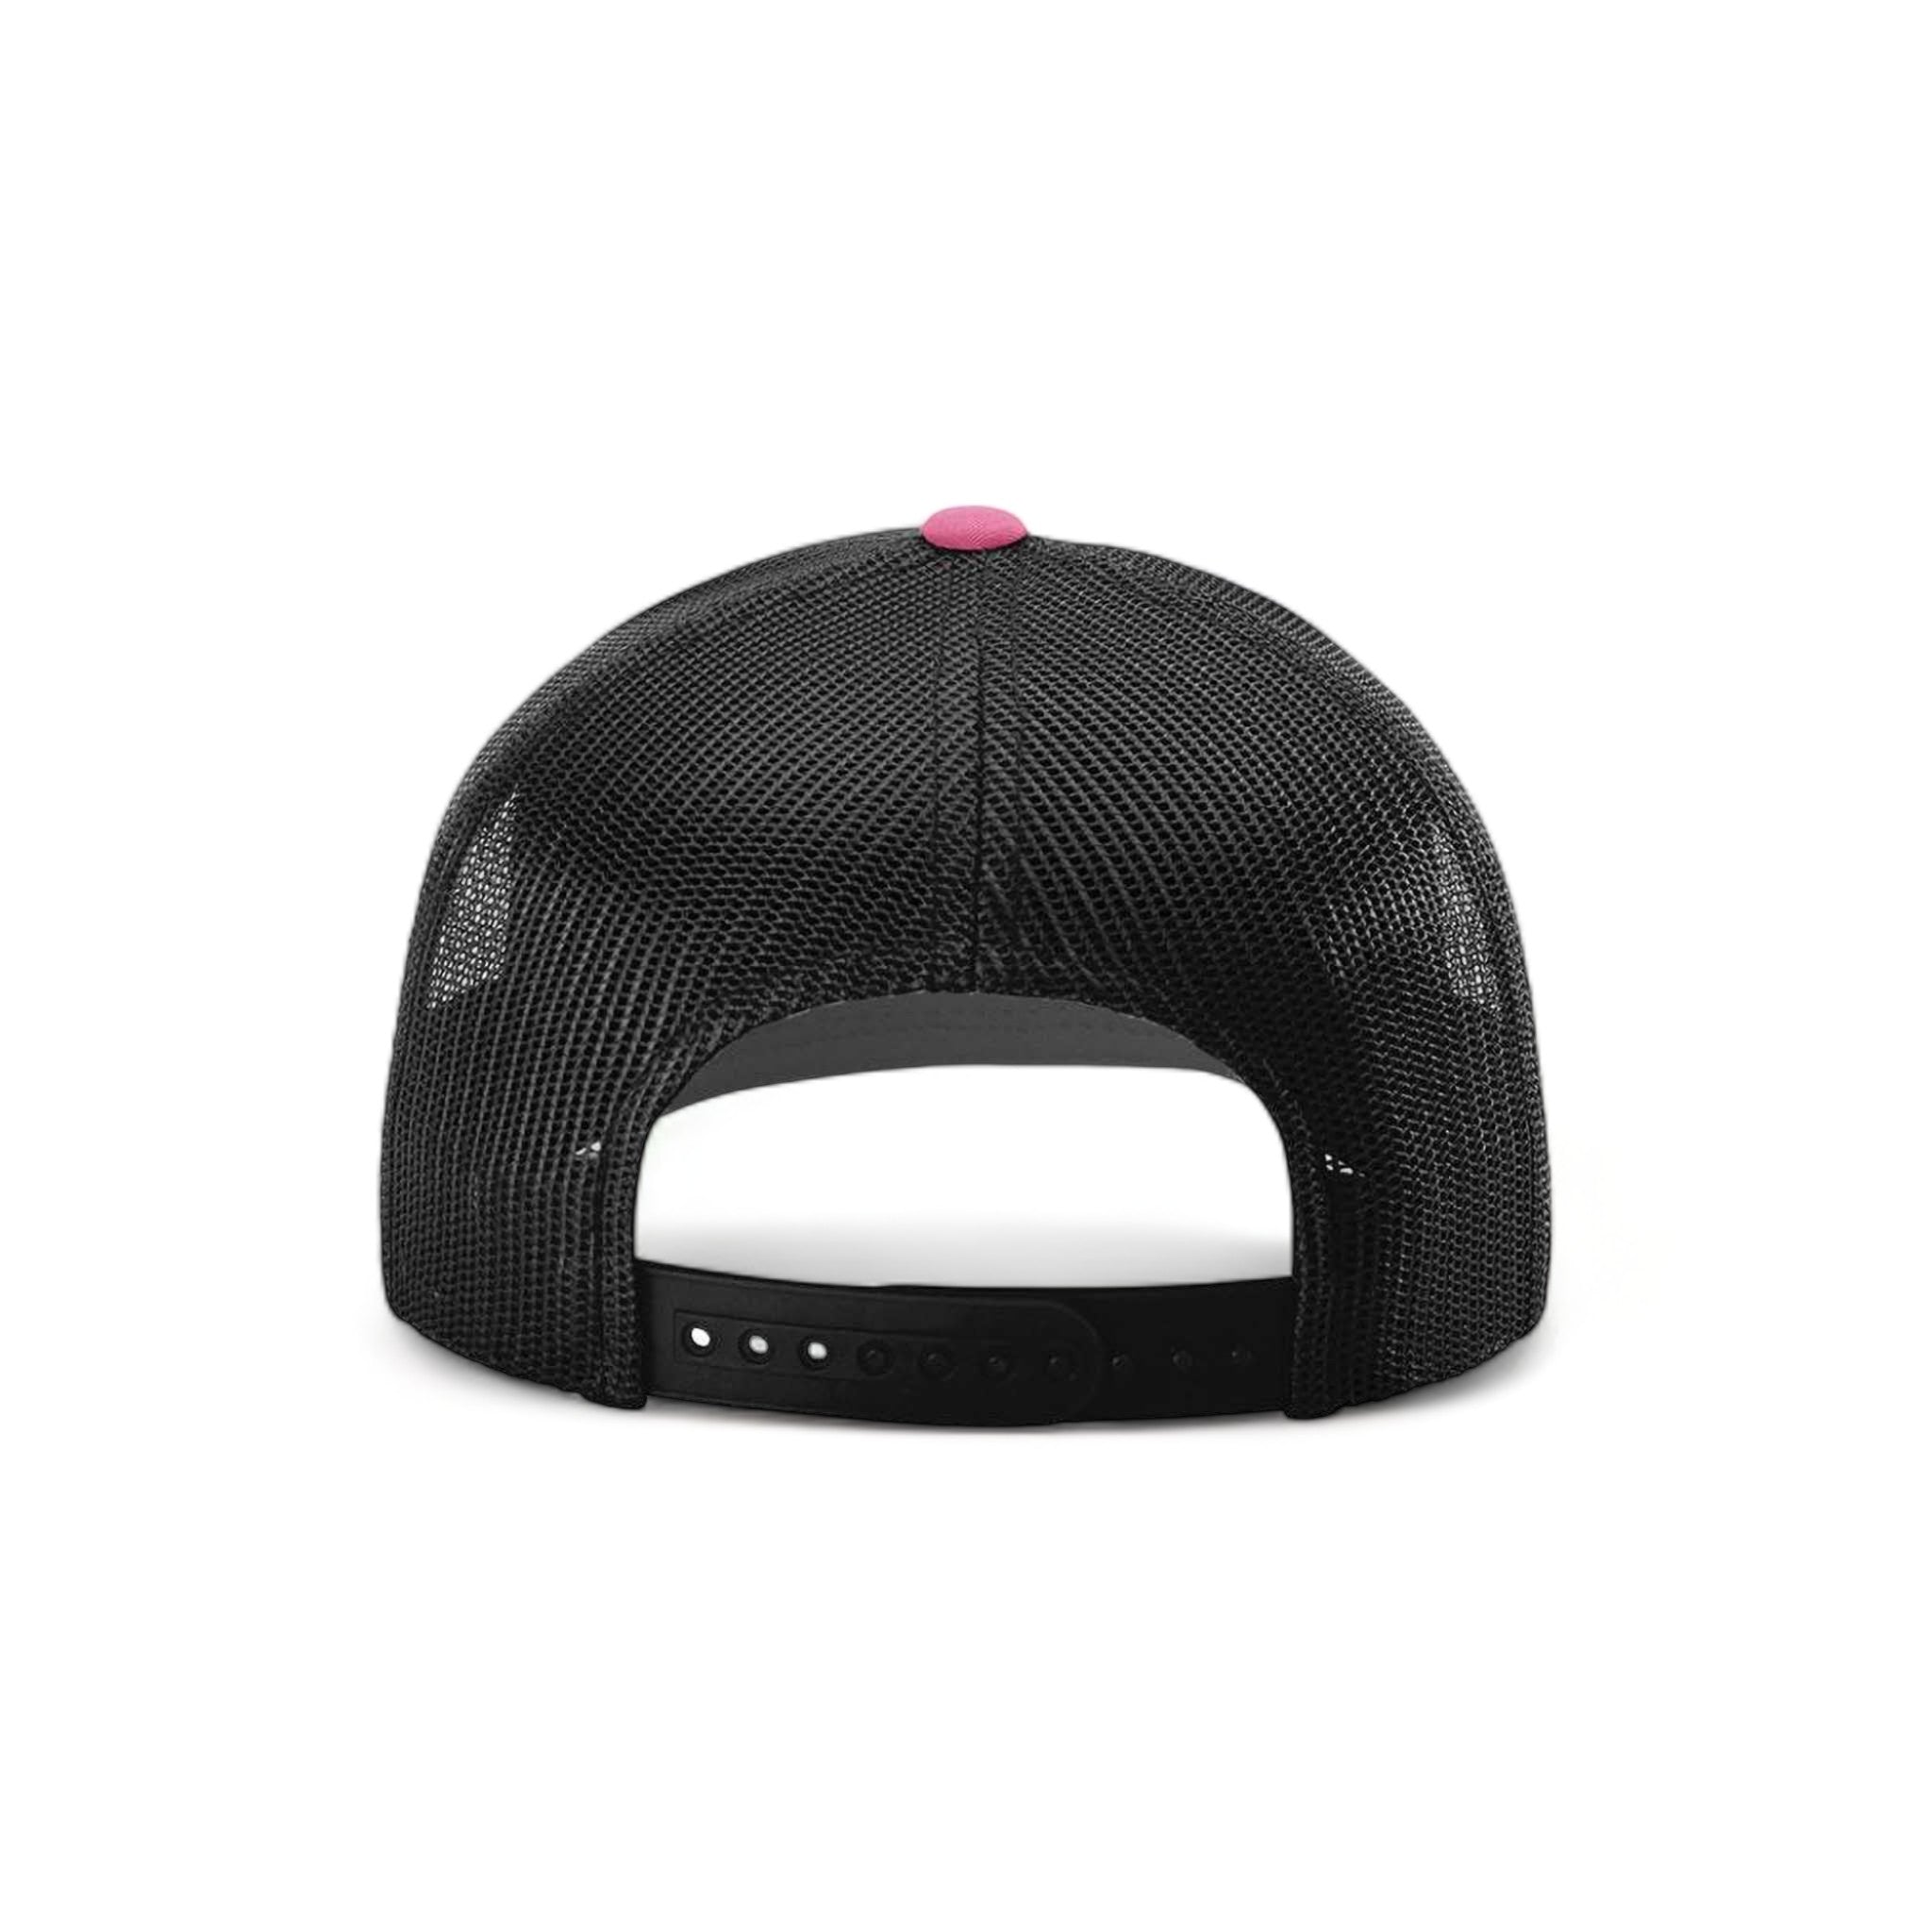 Back view of Richardson 115 custom hat in hot pink and black